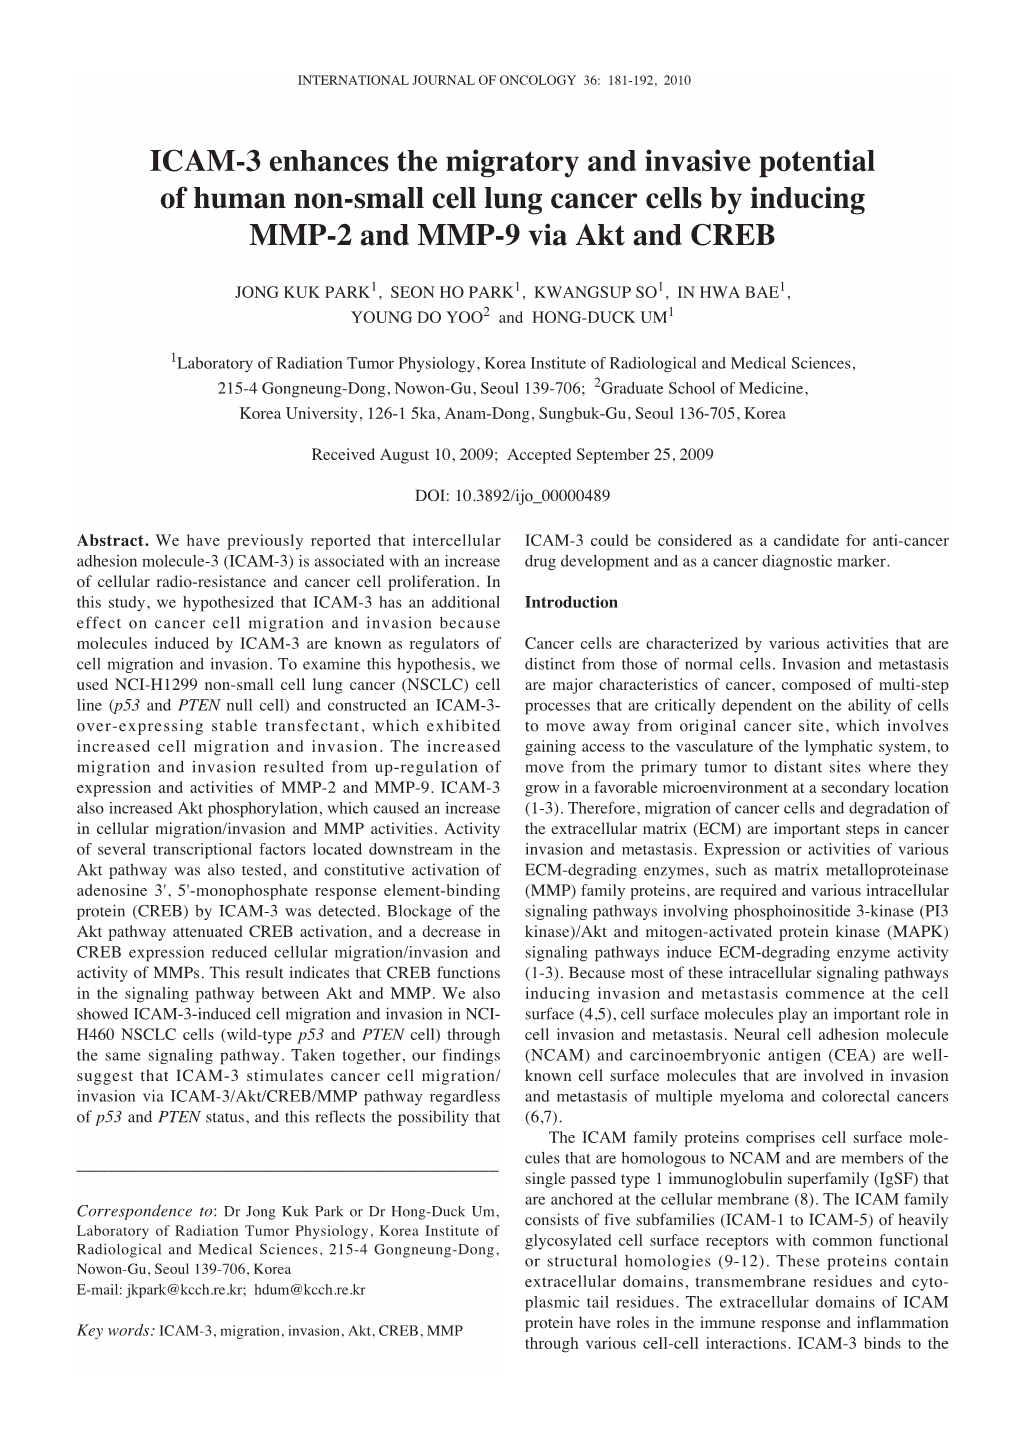 ICAM-3 Enhances the Migratory and Invasive Potential of Human Non-Small Cell Lung Cancer Cells by Inducing MMP-2 and MMP-9 Via Akt and CREB